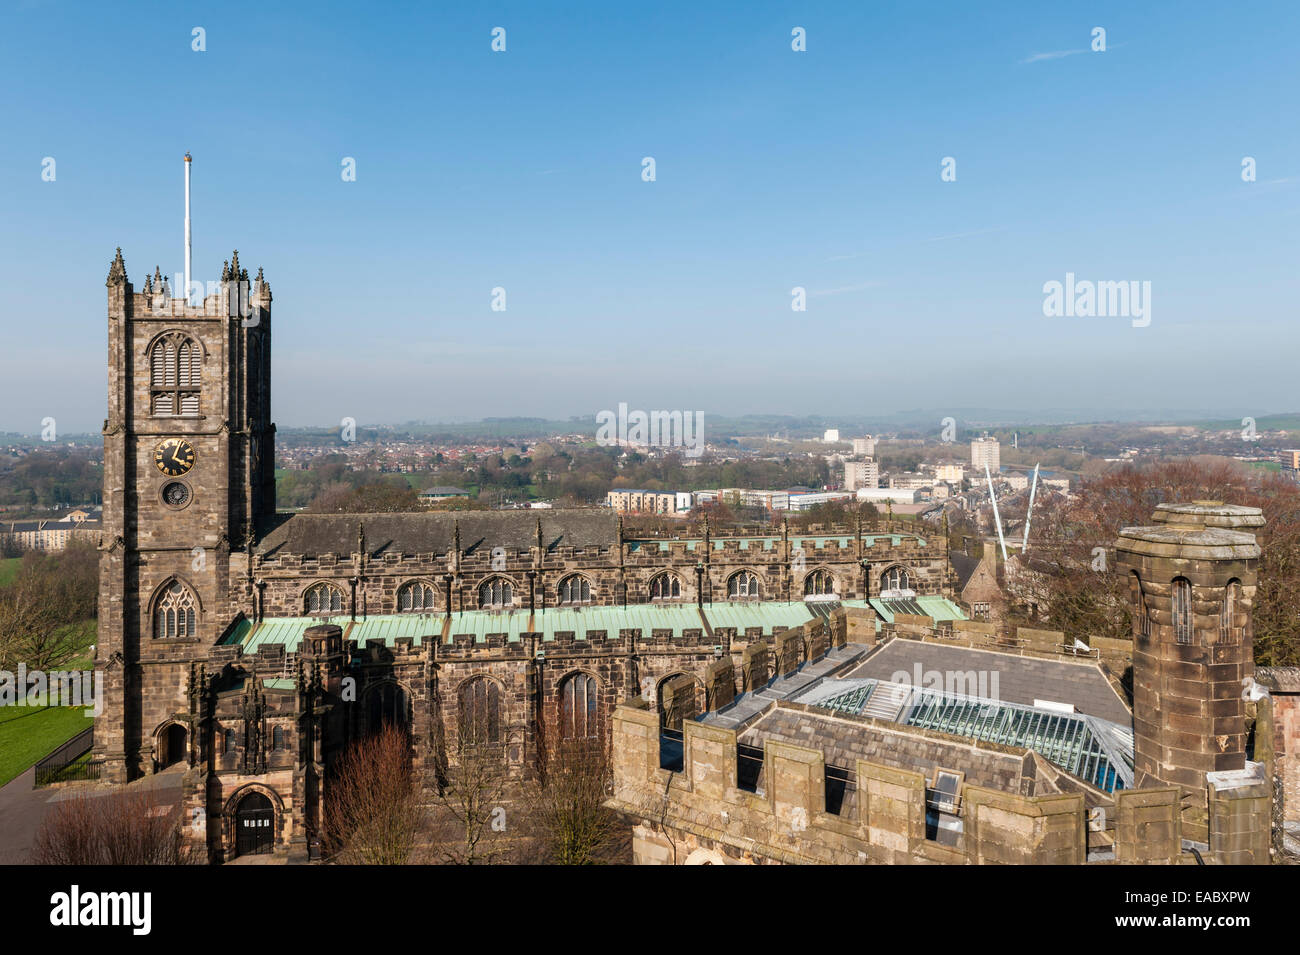 Lancaster Priory church, seen from the battlements of the old prison of Lancaster Castle, Lancashire, UK Stock Photo